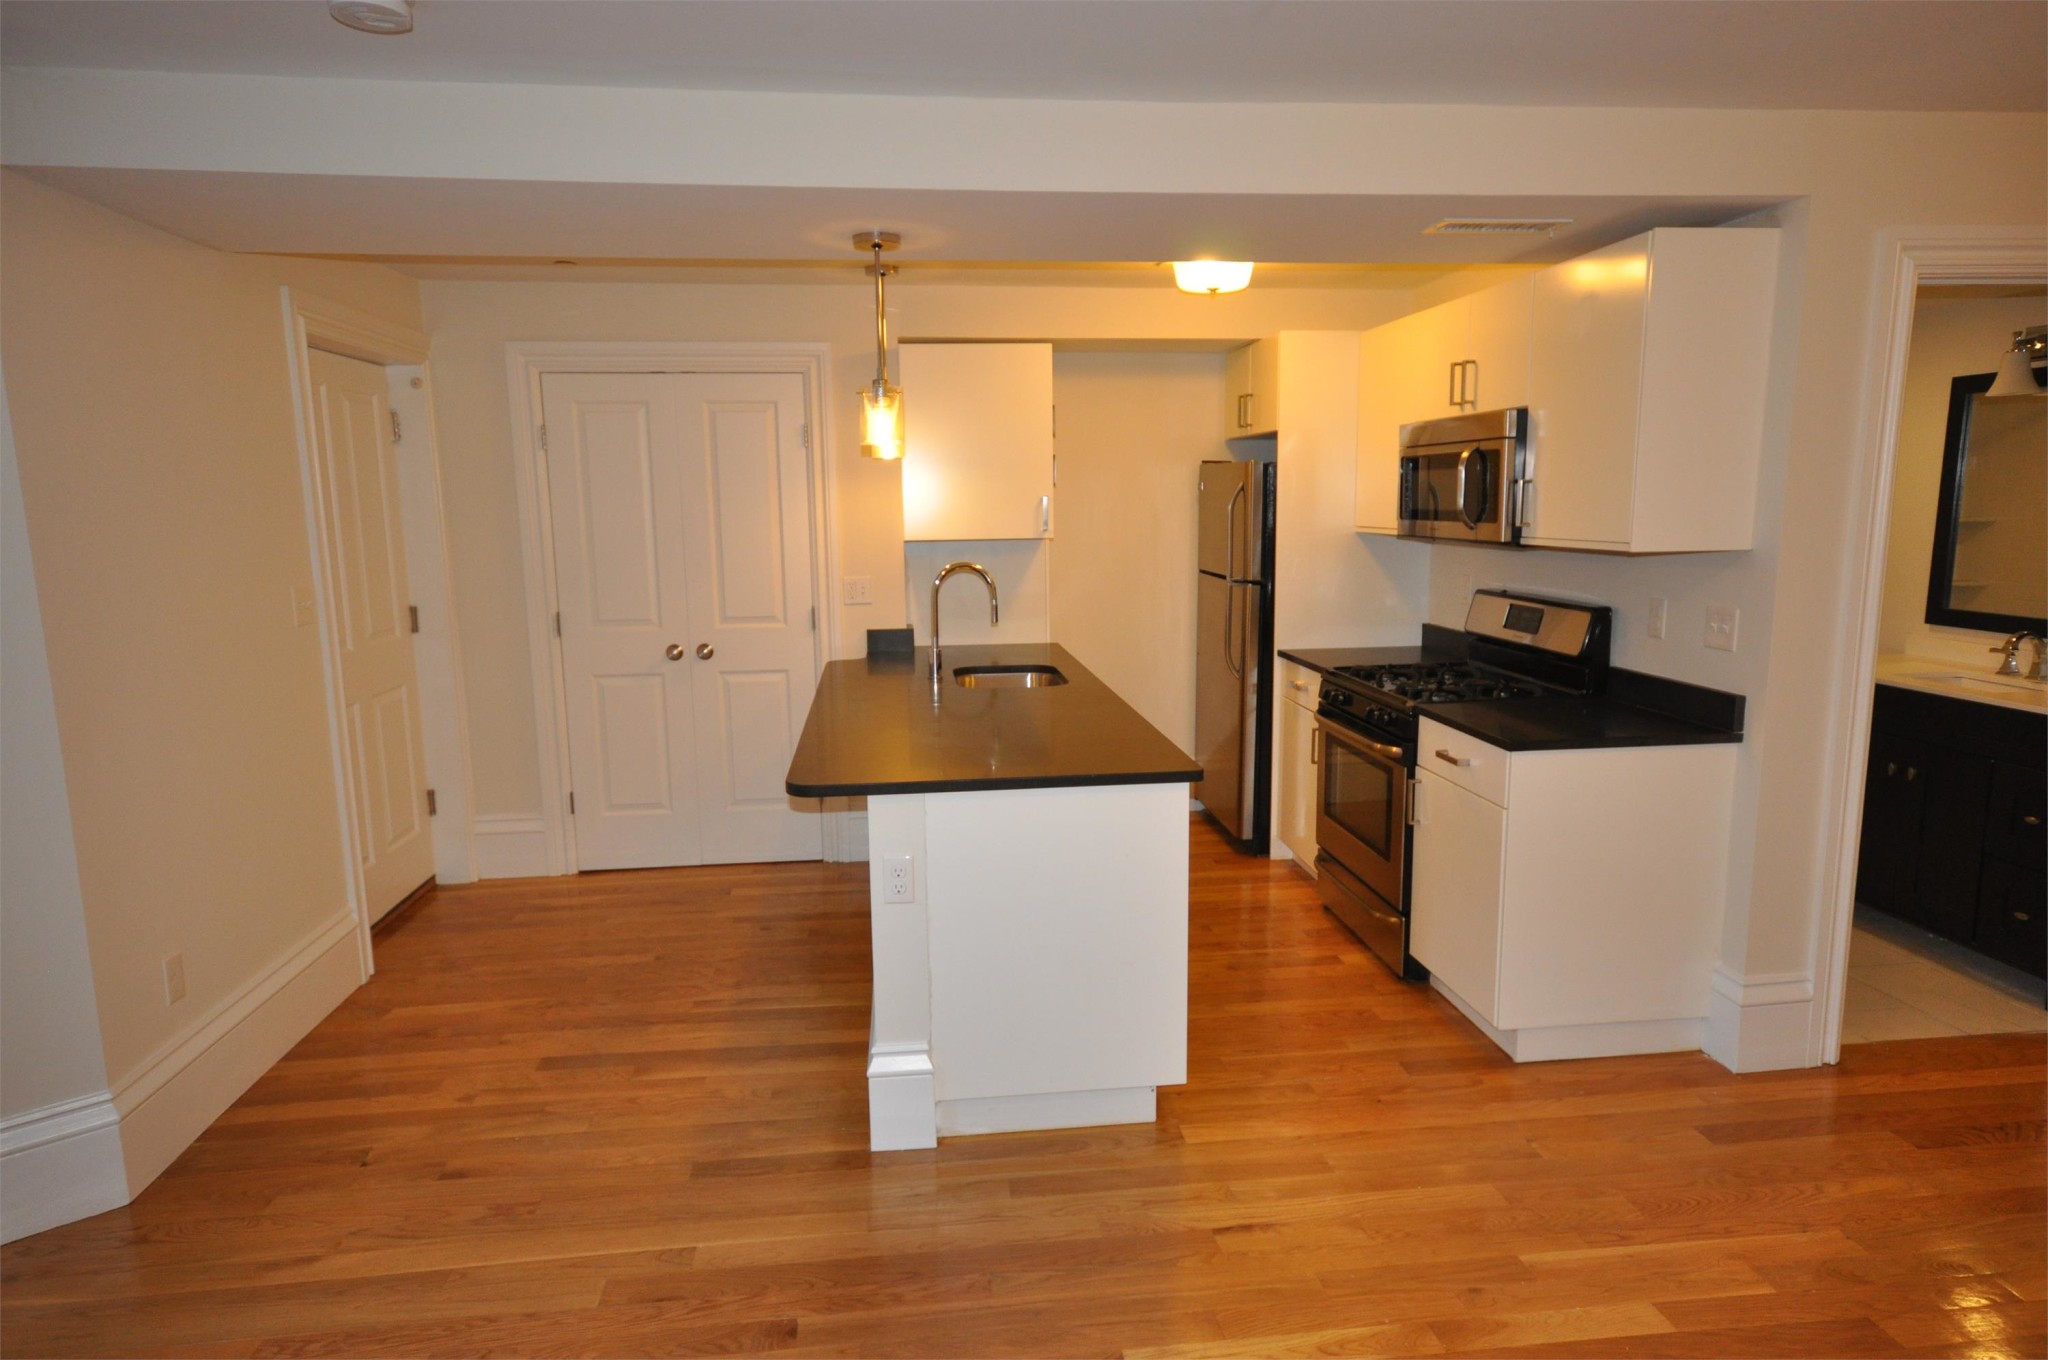 Photos of apartment on Newcomb St.,Boston MA 02118